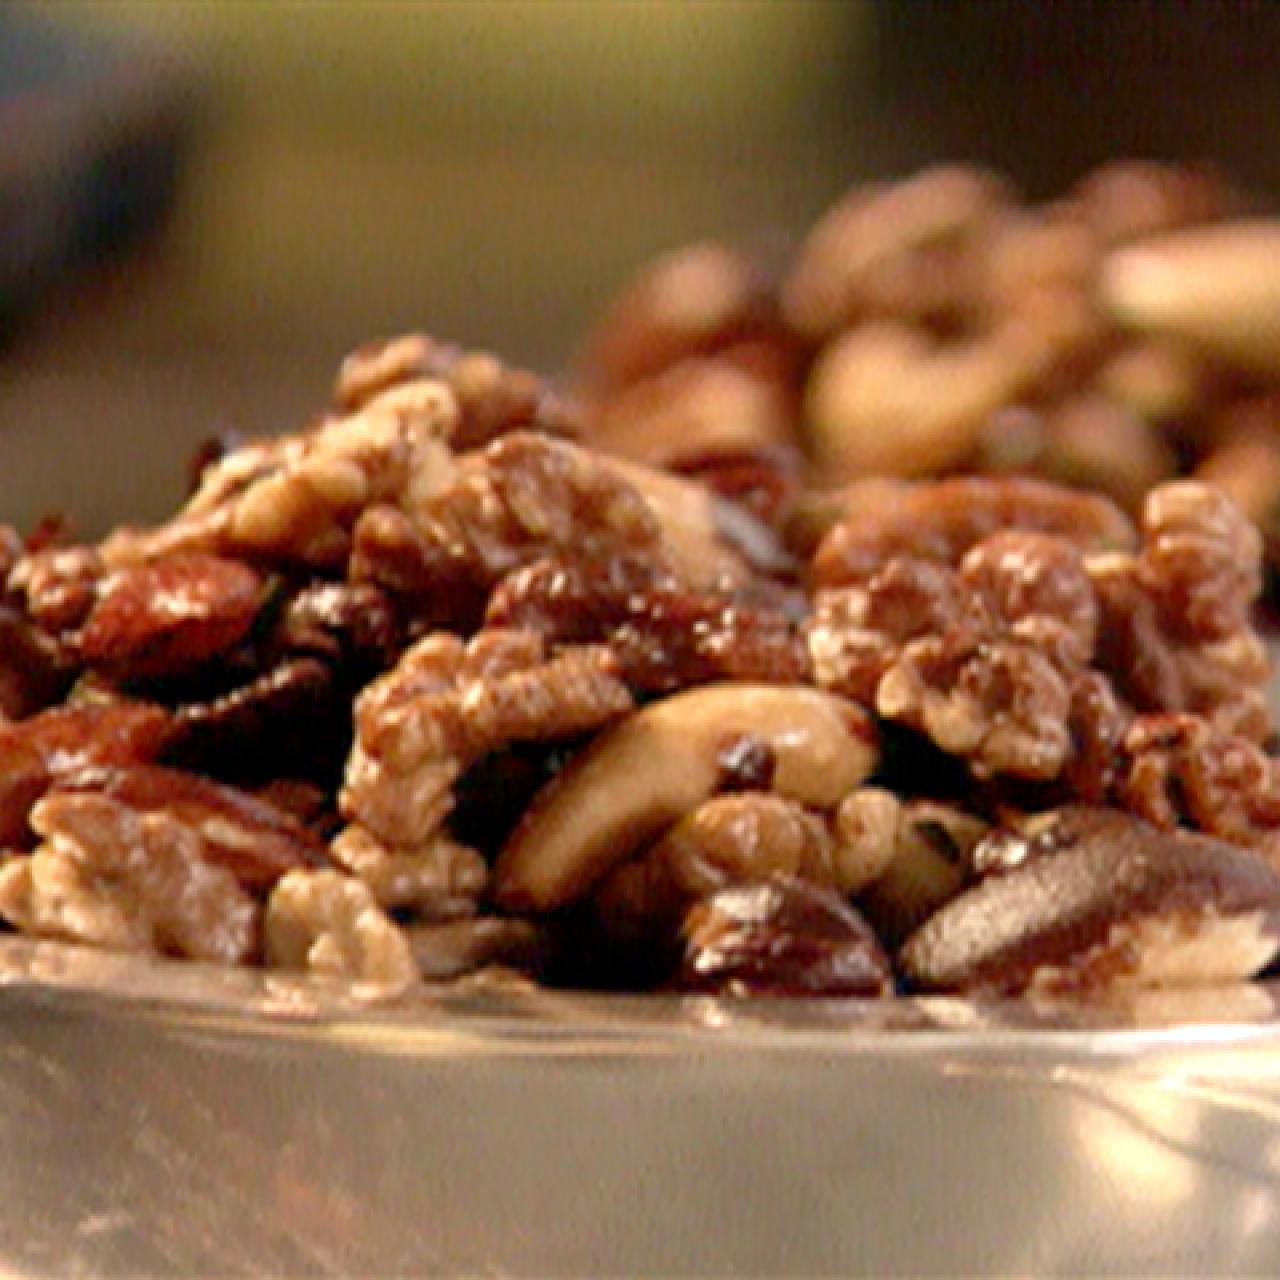 Baked Mixed Nuts Recipe in Honey: How Will You Eat This Sweet